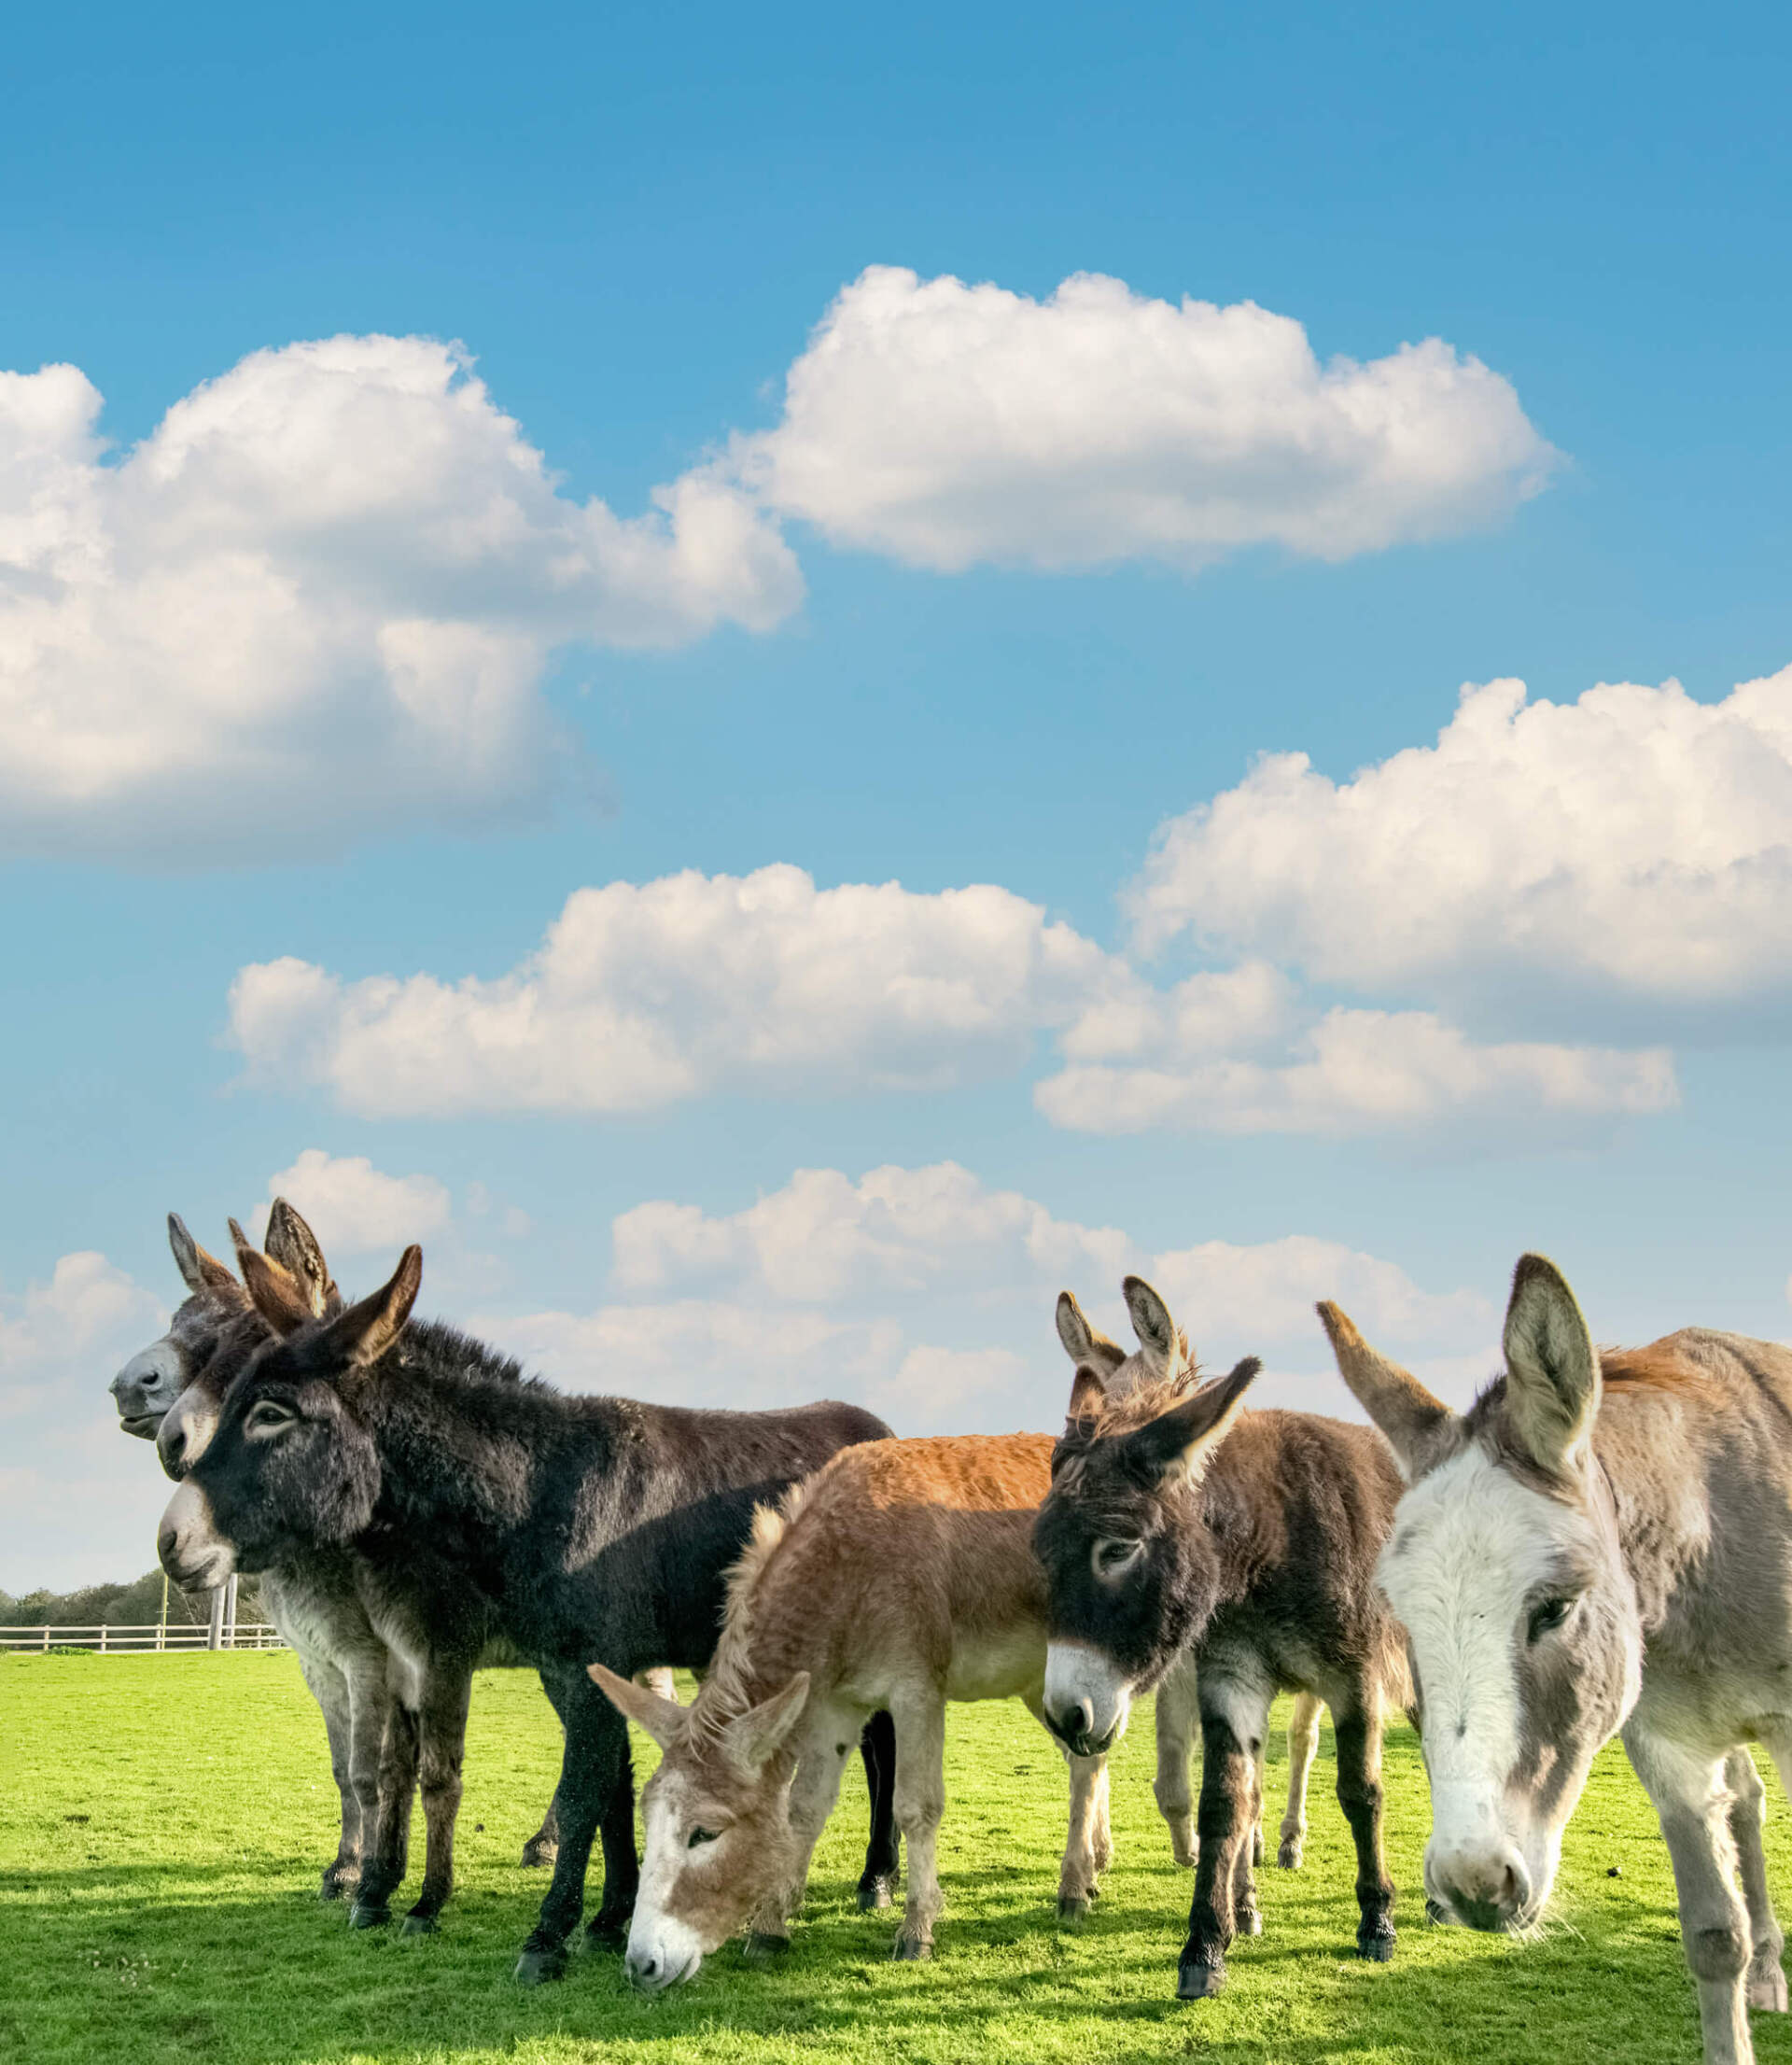 A group of donkeys in a grass field with blue sky and clouds